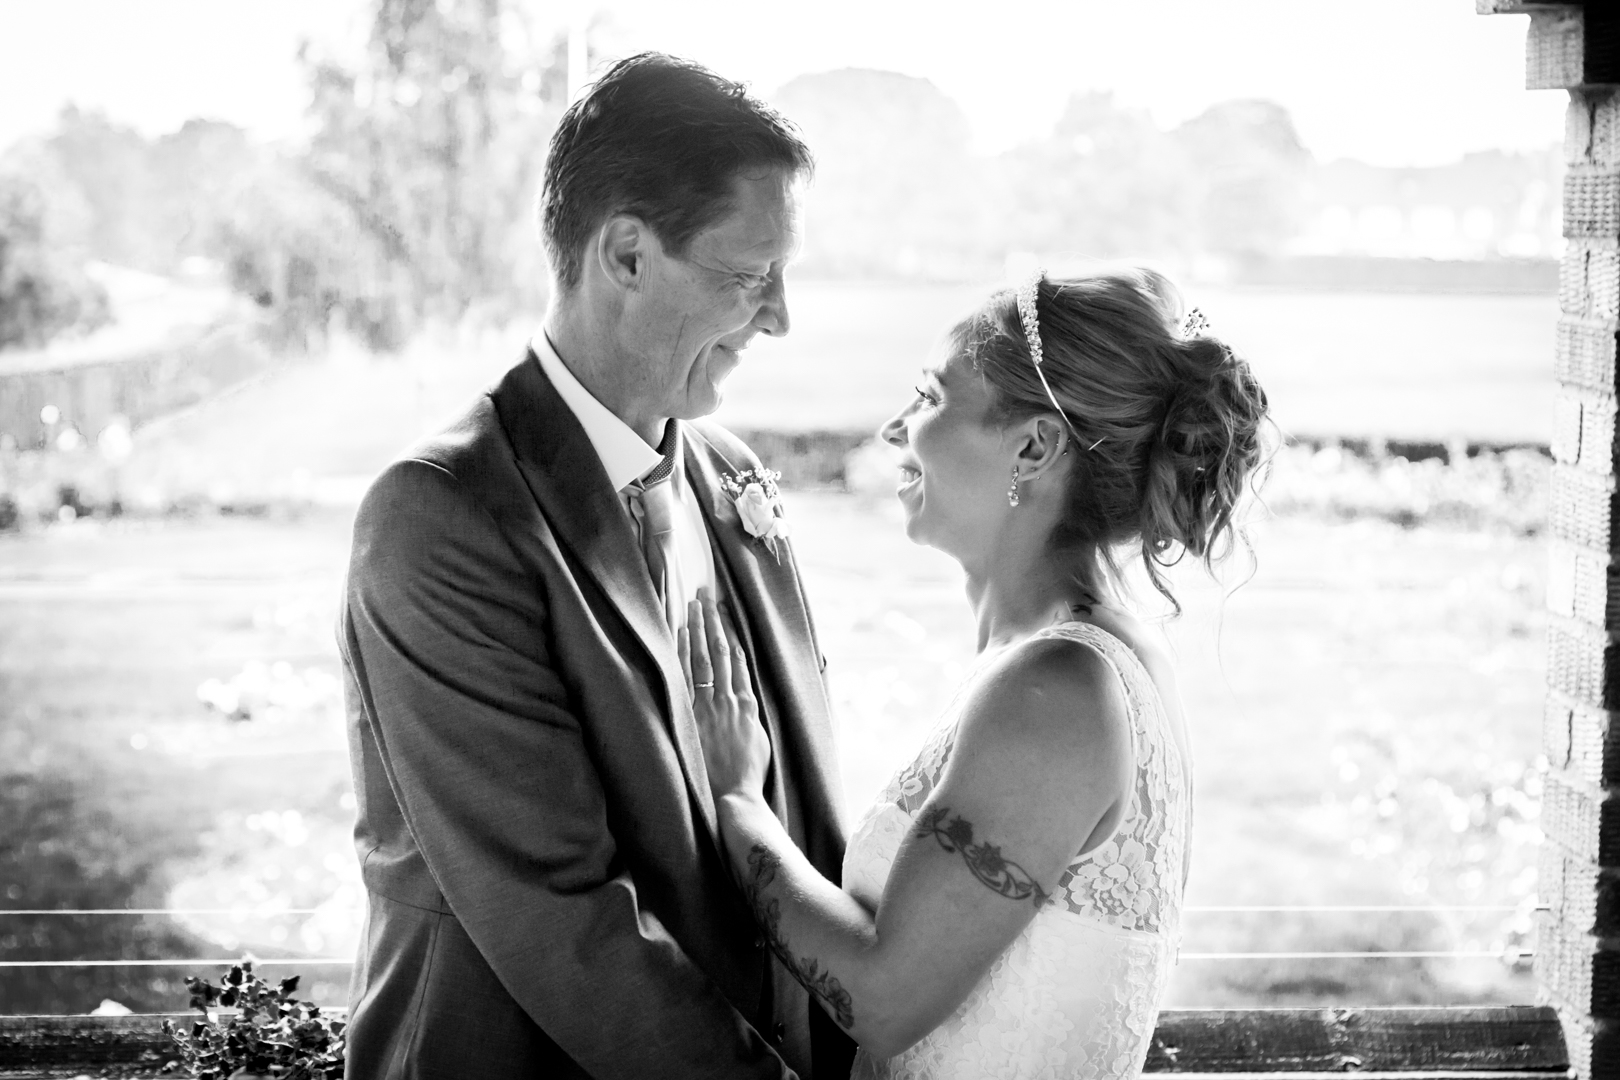 Bride & Groom On the Balcony - Paul and Diane at The Cavendish in Eastcote, Middlesex by Tim Durham at Pinner Wedding Photography. Photographer in Harrow and photographer in Ruislip